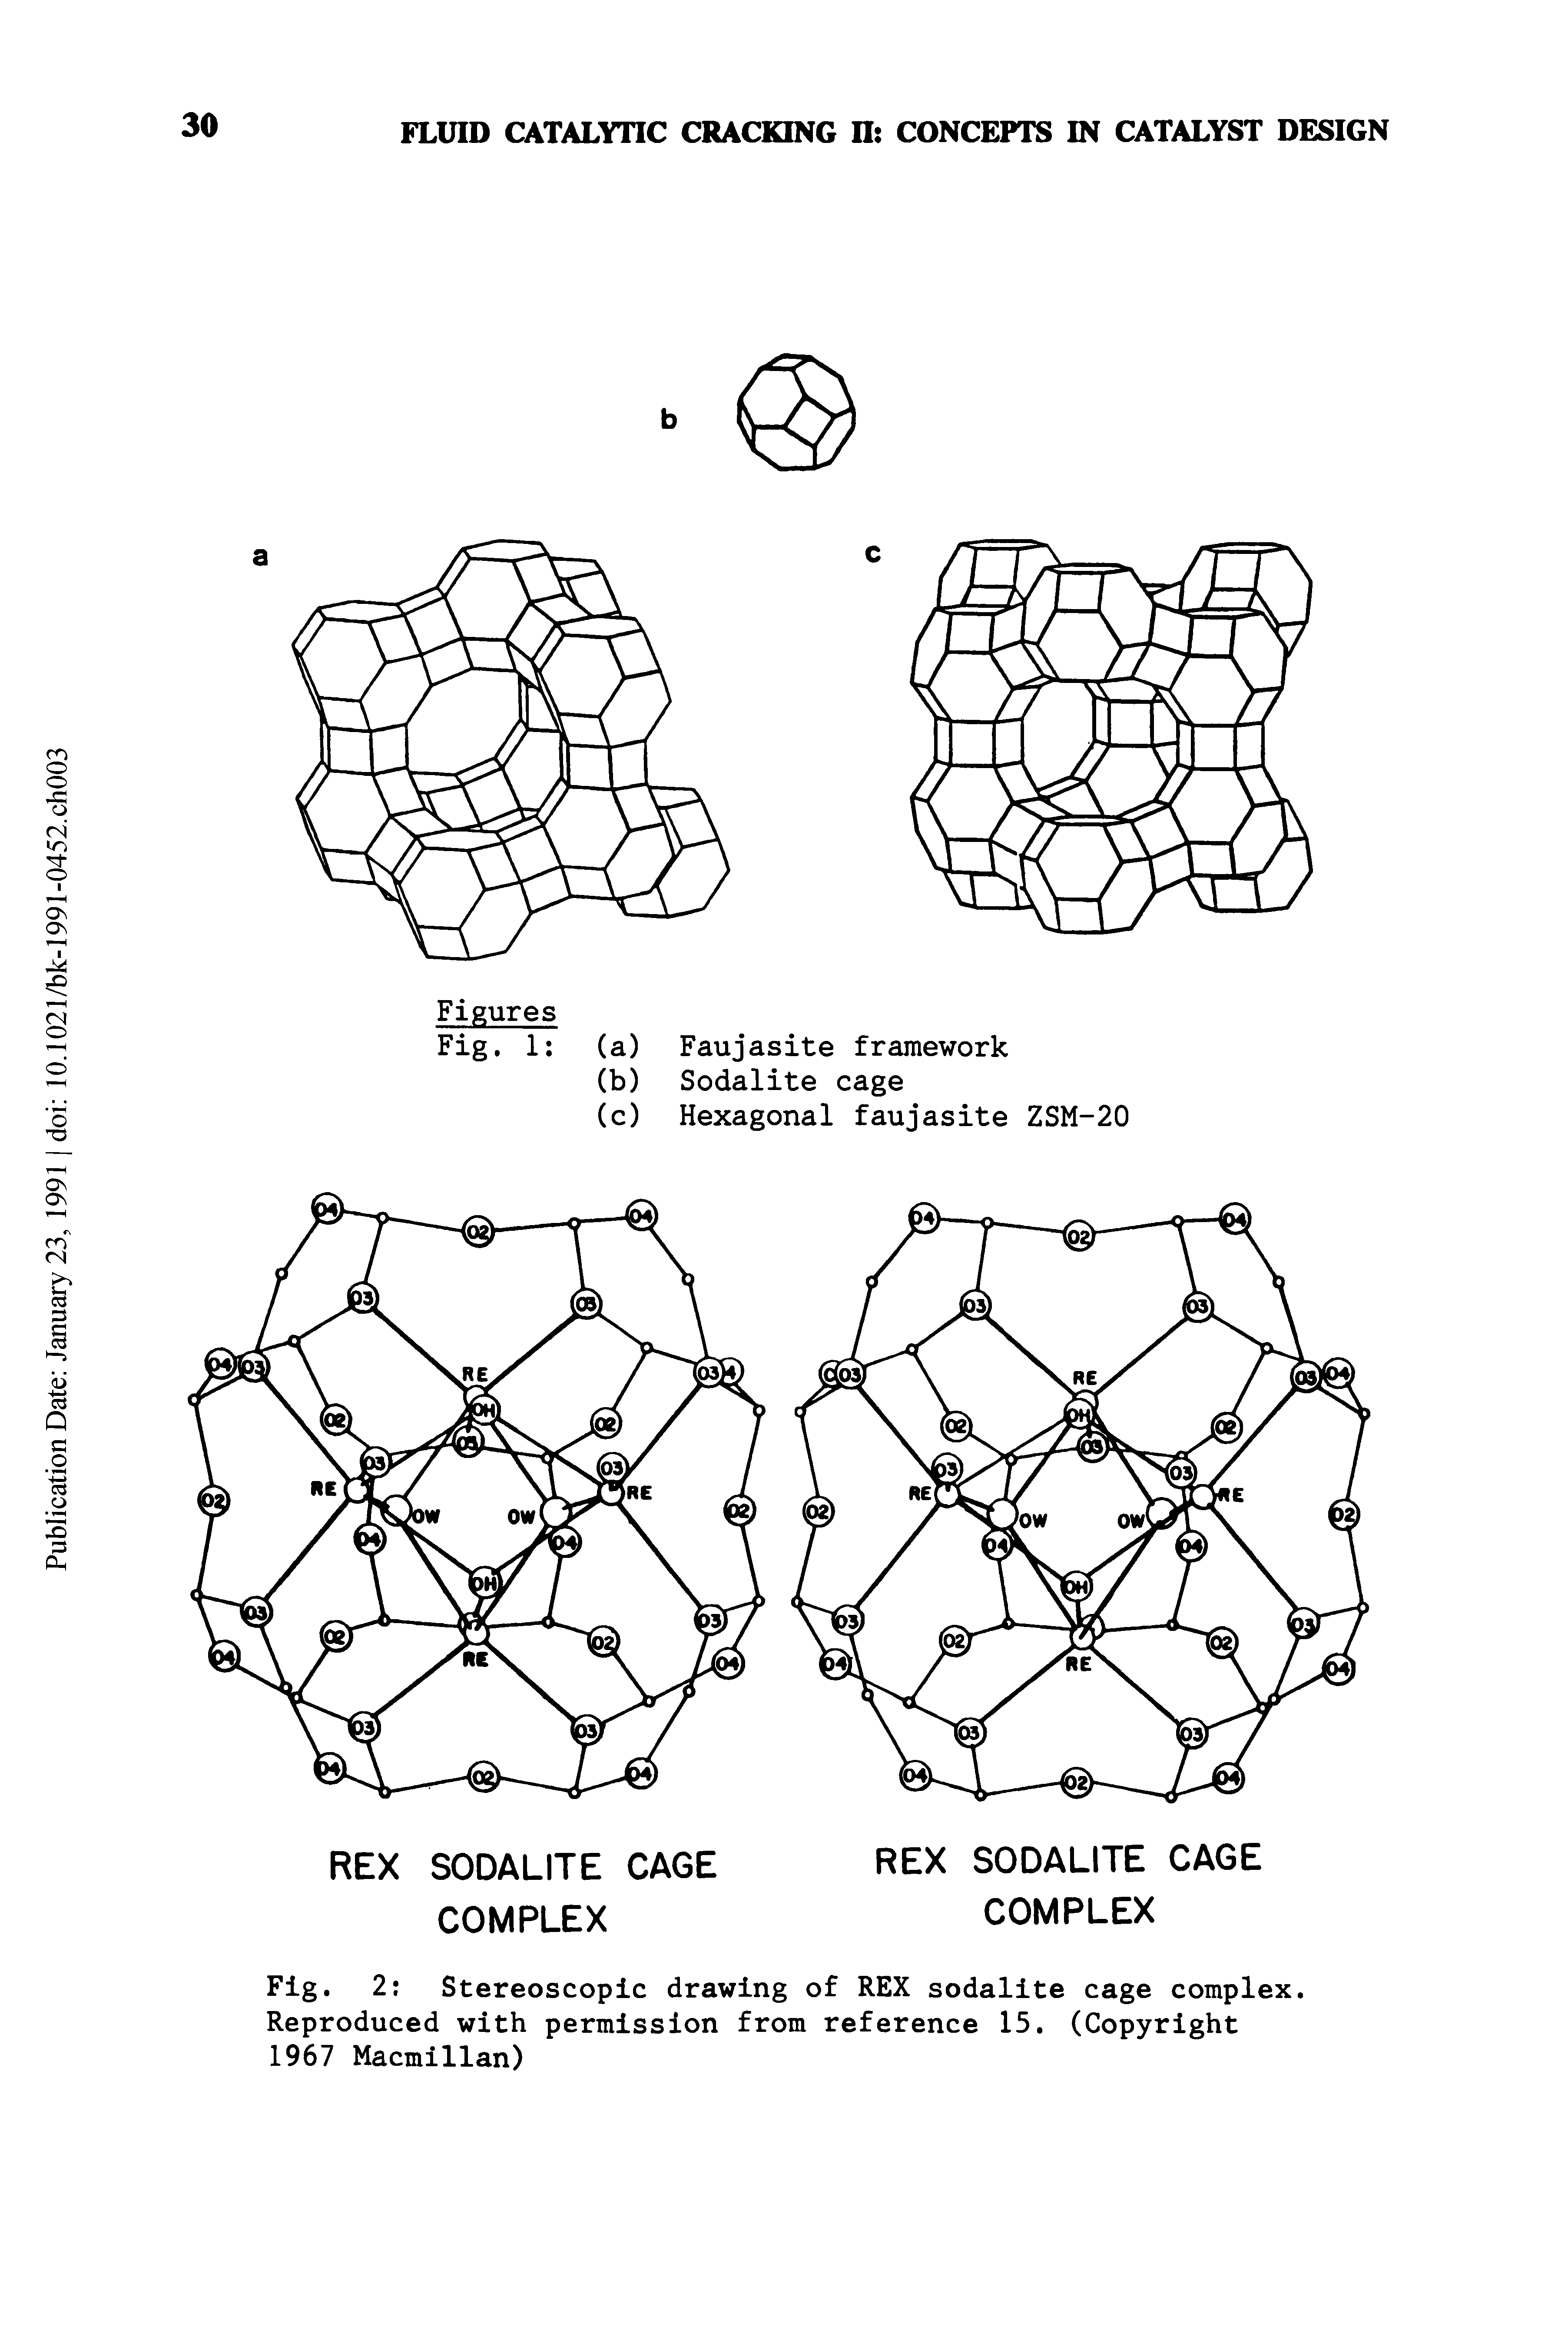 Fig. 2 Stereoscopic drawing of REX sodalite cage complex. Reproduced with permission from reference 15. (Copyright 1967 Macmillan)...